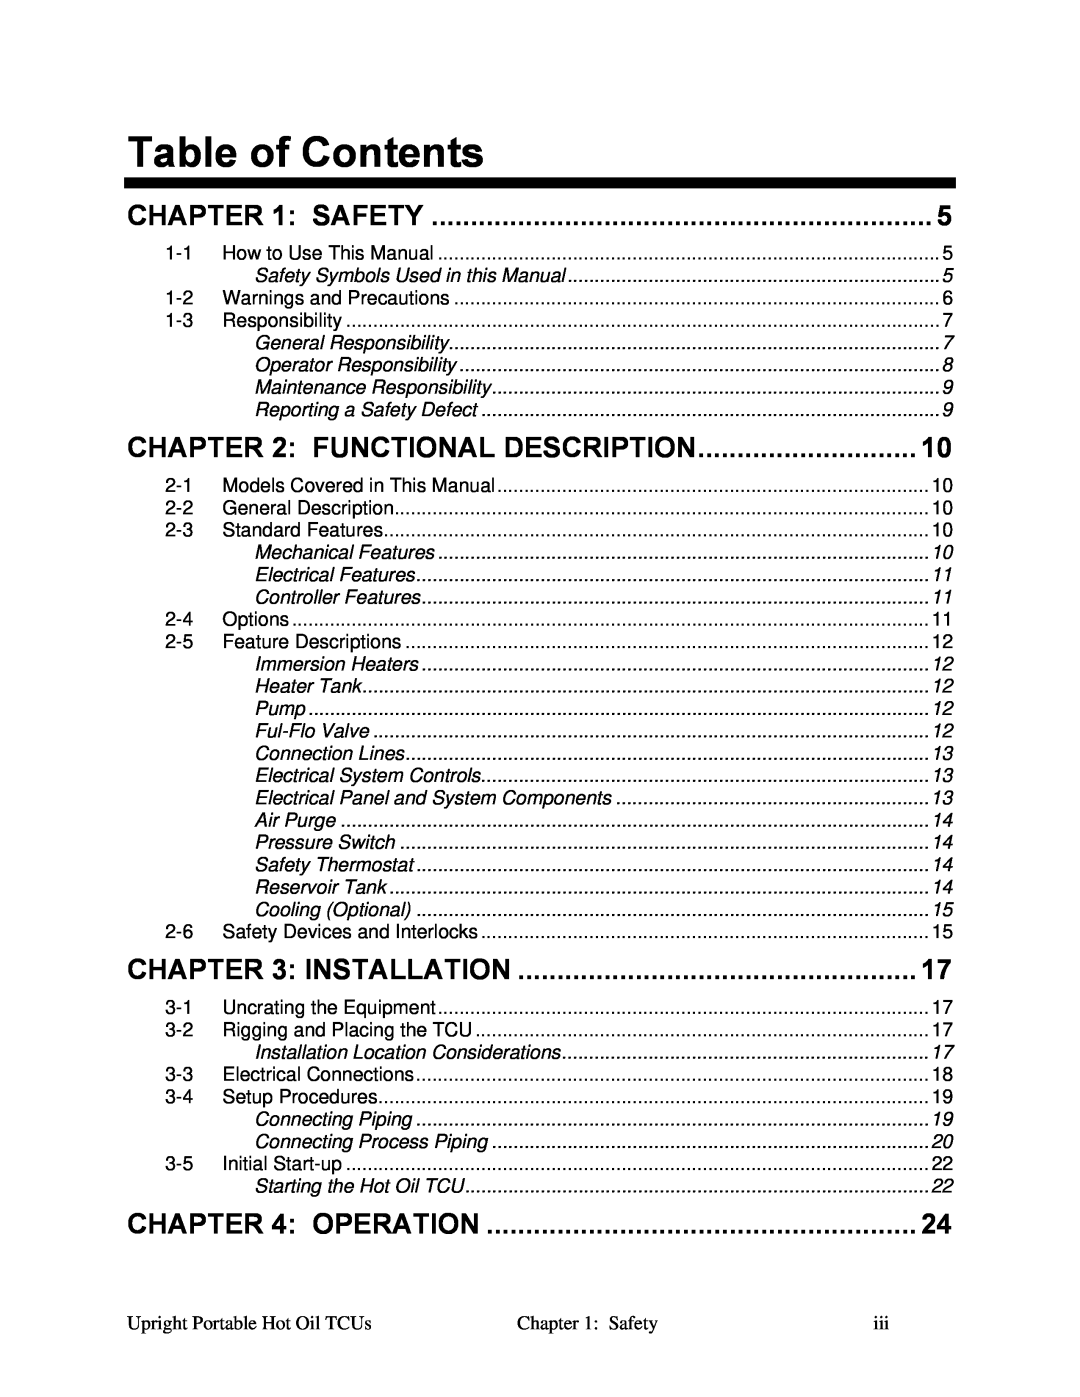 Sterling 682.88107.00 specifications Table of Contents, Functional Description, Installation, Operation, Safety 